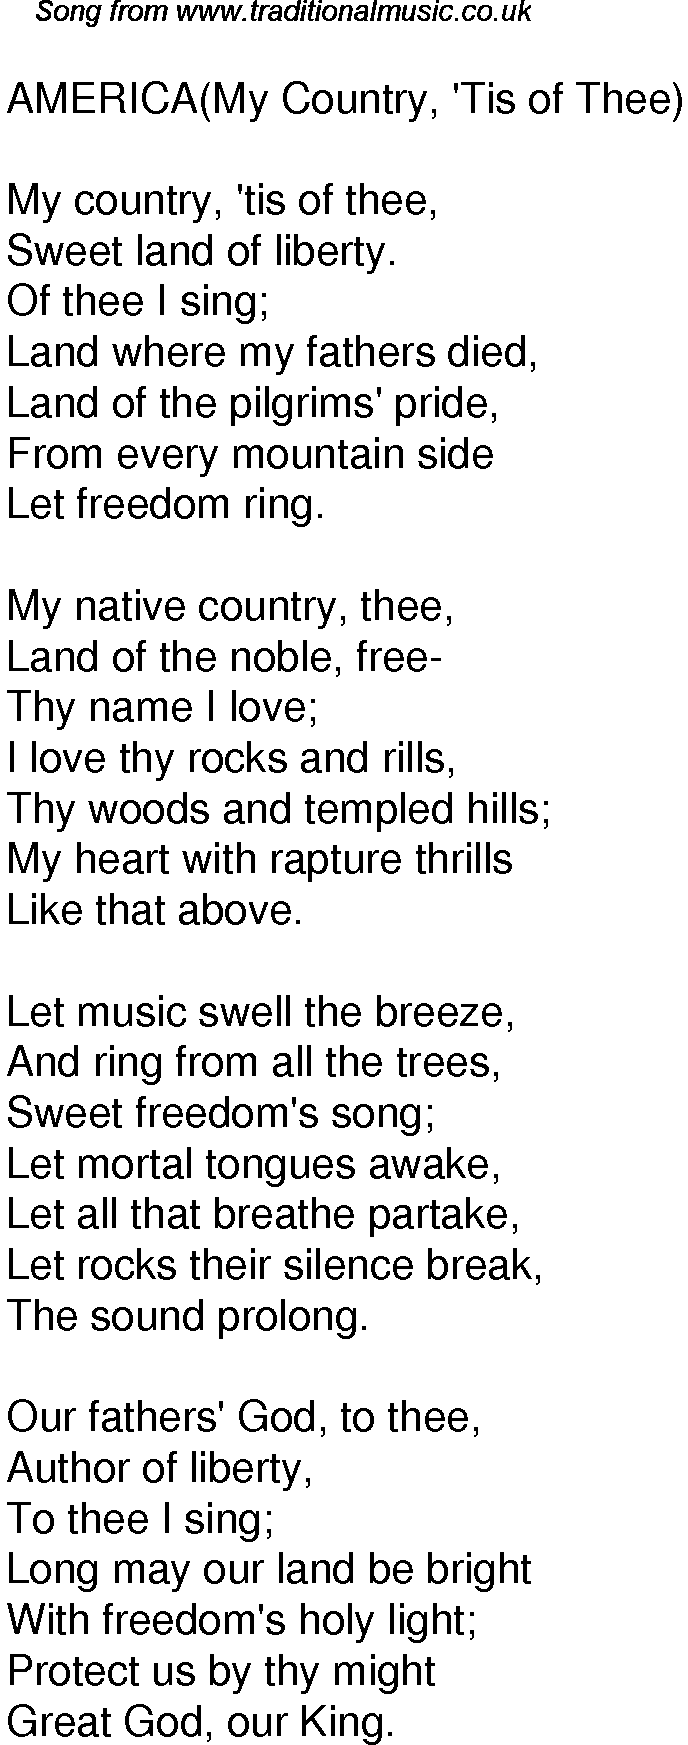 Old Time Song Lyrics for 59 America My Country Tis Of Thee